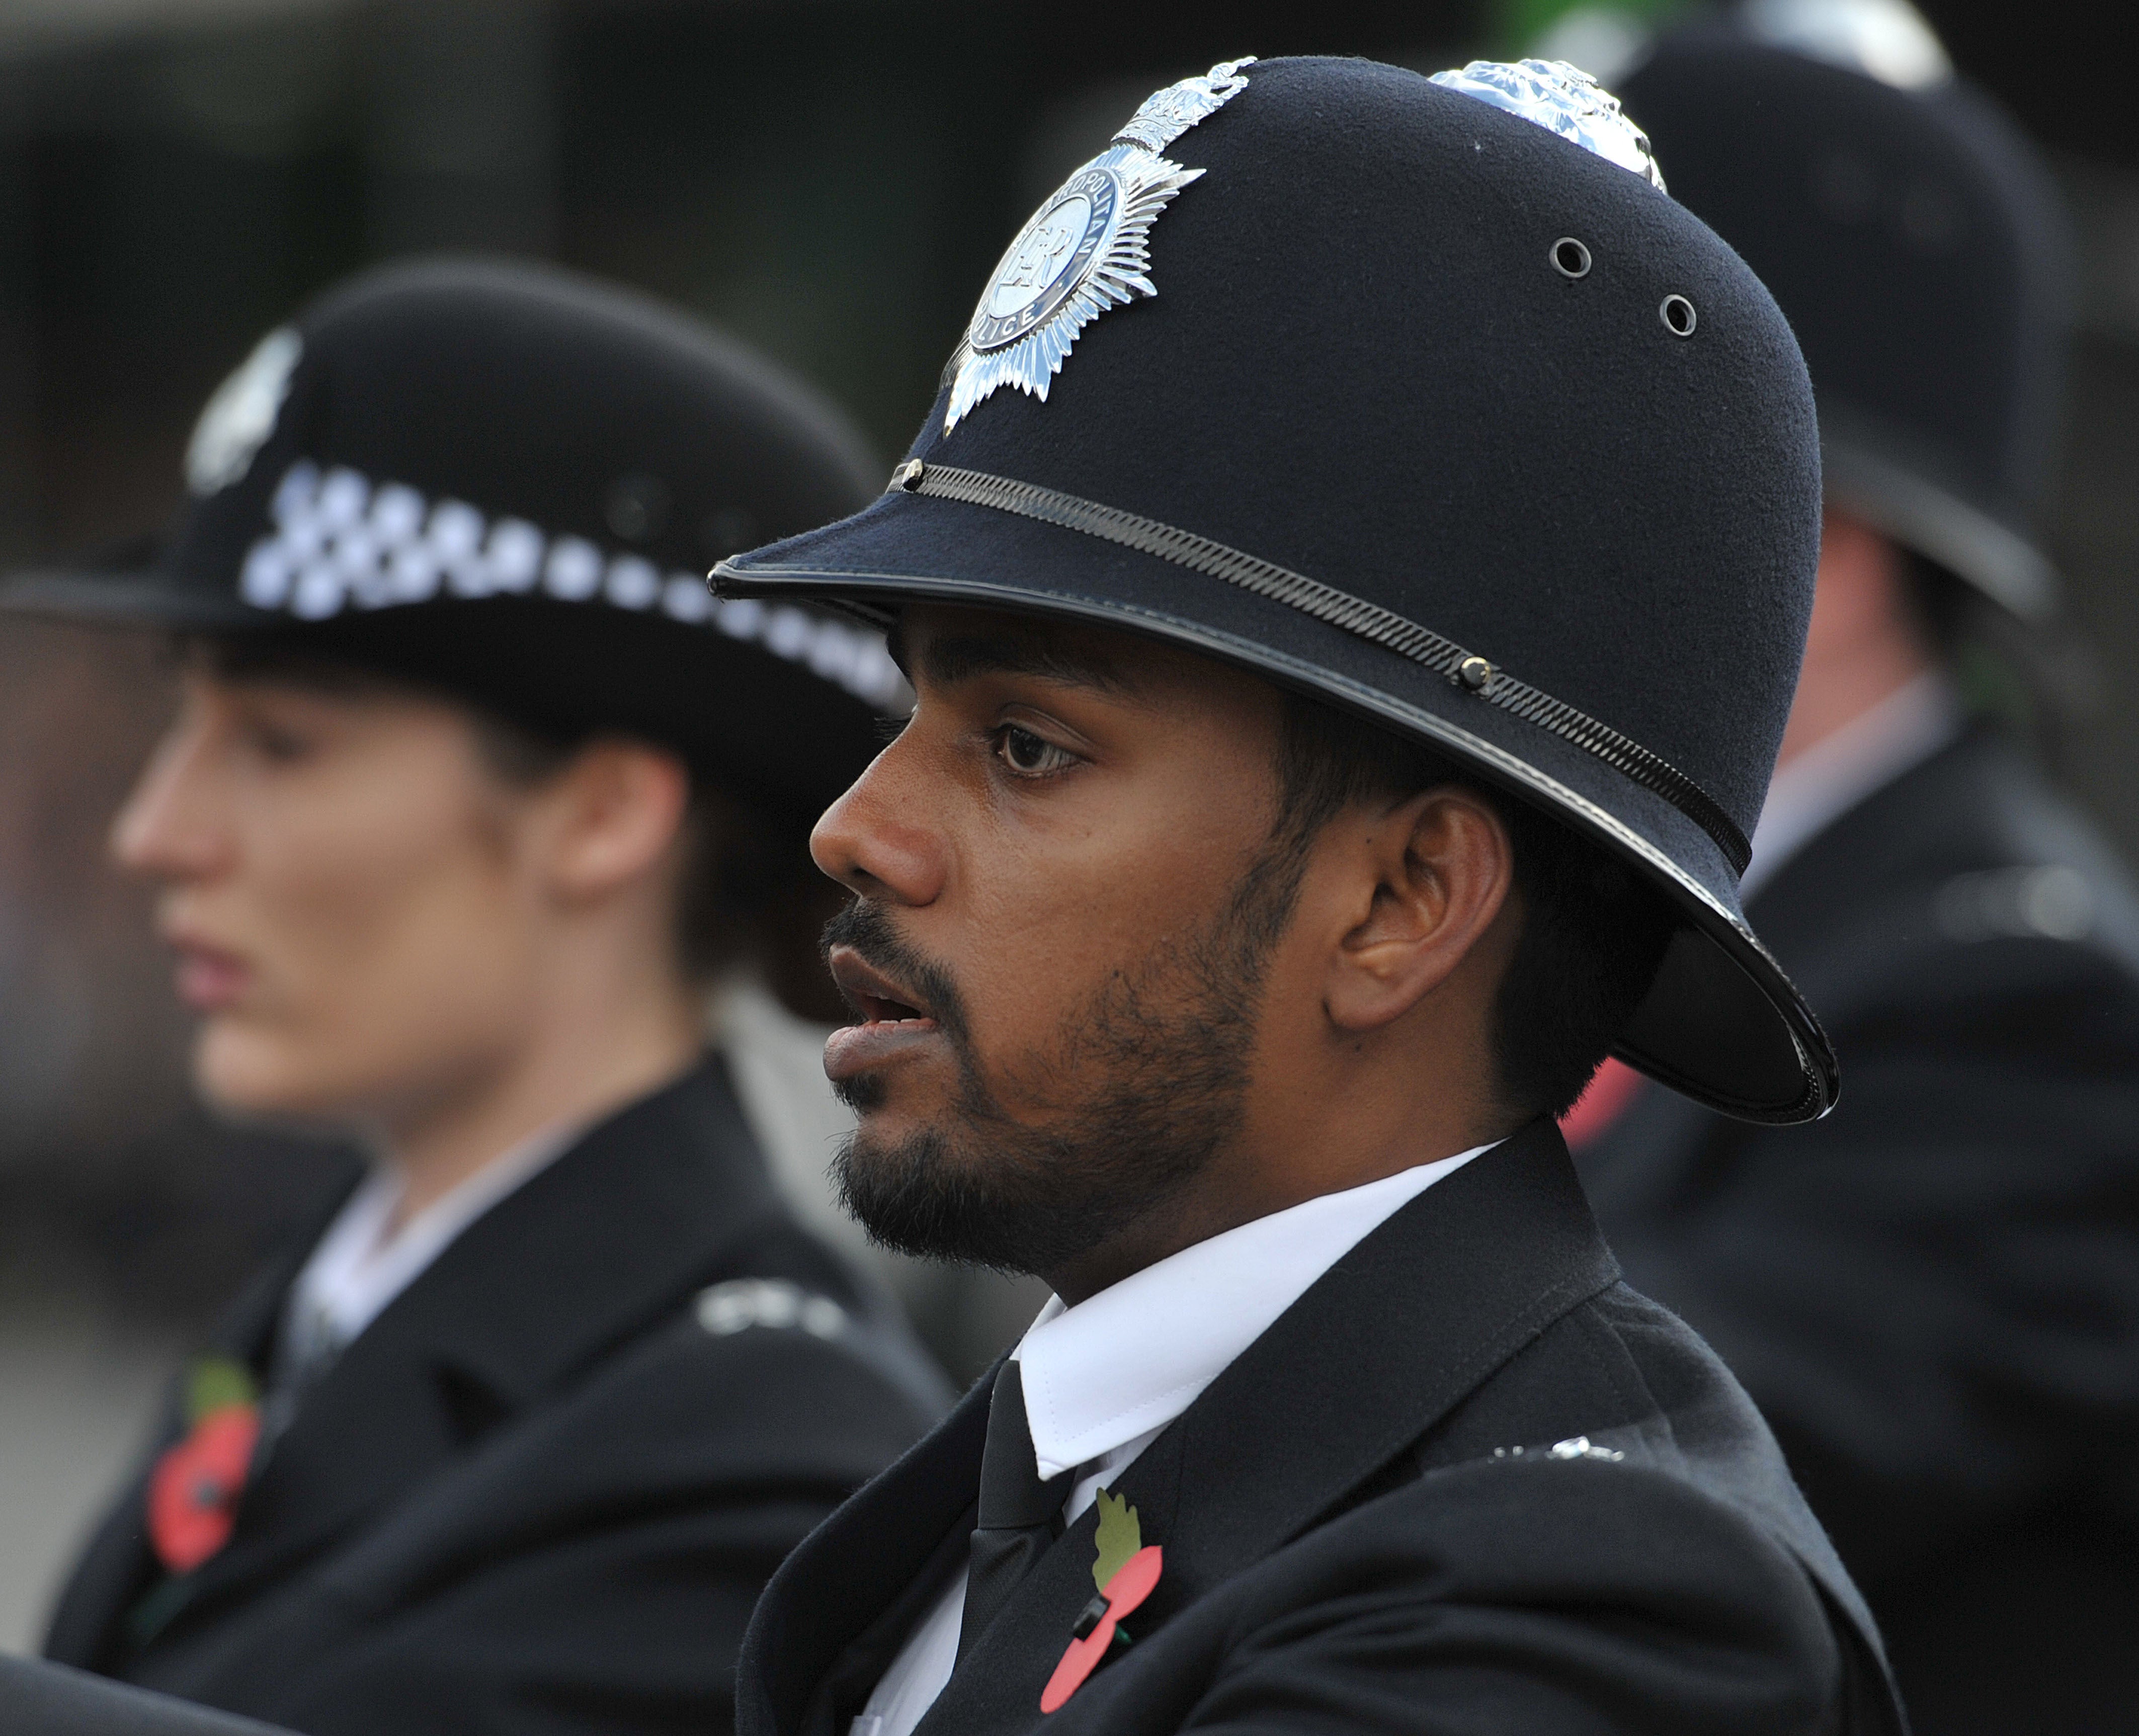 Metropolitan Police recruits during a passing out parade for new officers. Their fallen colleagues have been remembered at a ceremony in Northern Ireland (Nick Ansell/PA)